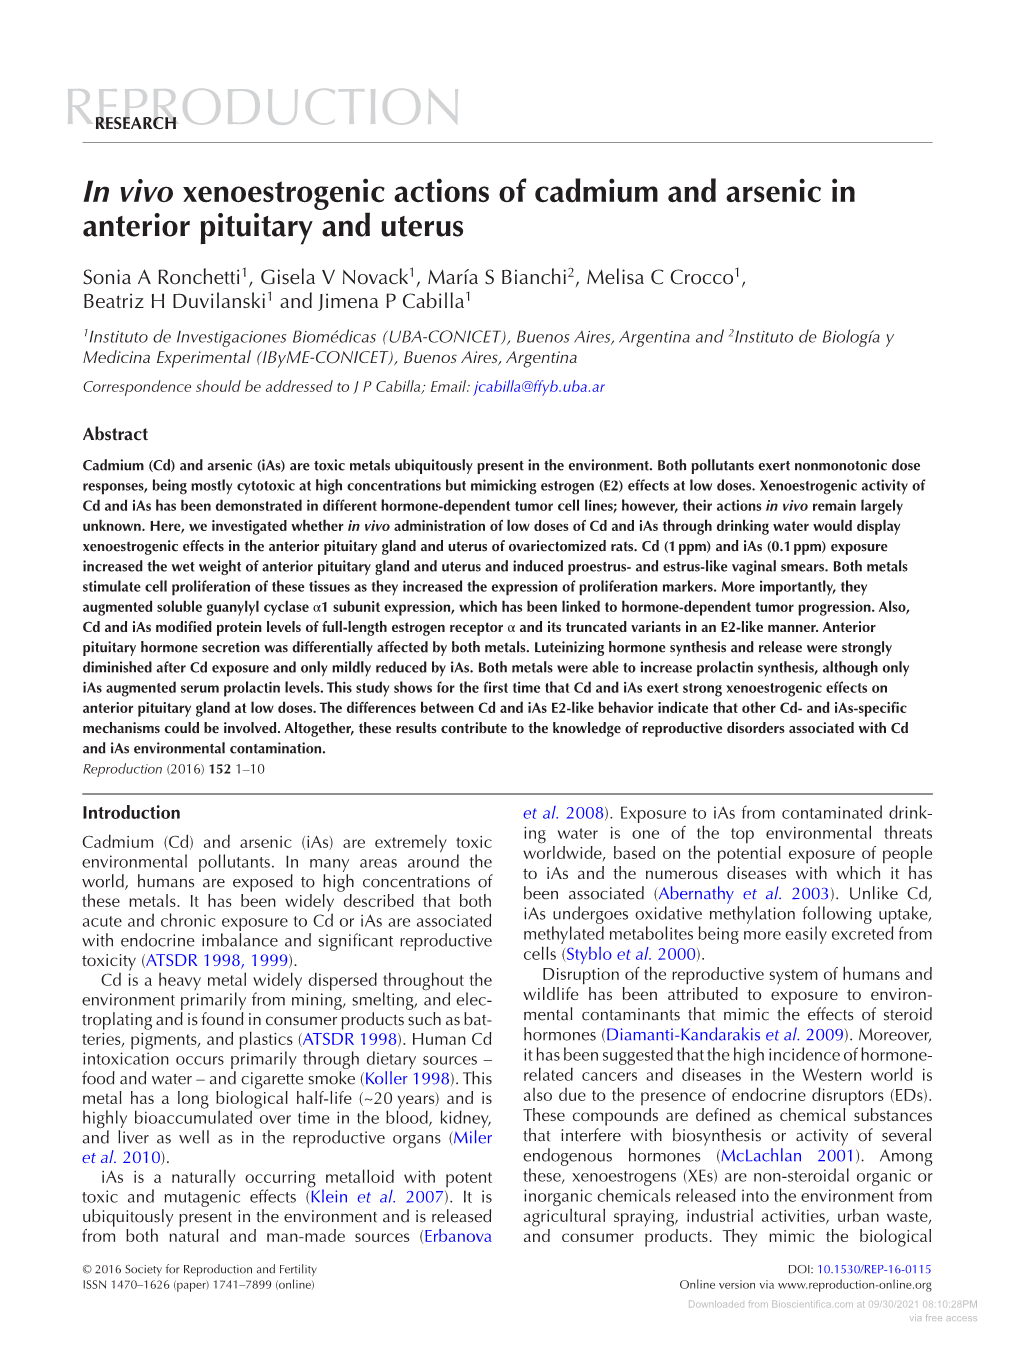 In Vivo Xenoestrogenic Actions of Cadmium and Arsenic in Anterior Pituitary and Uterus